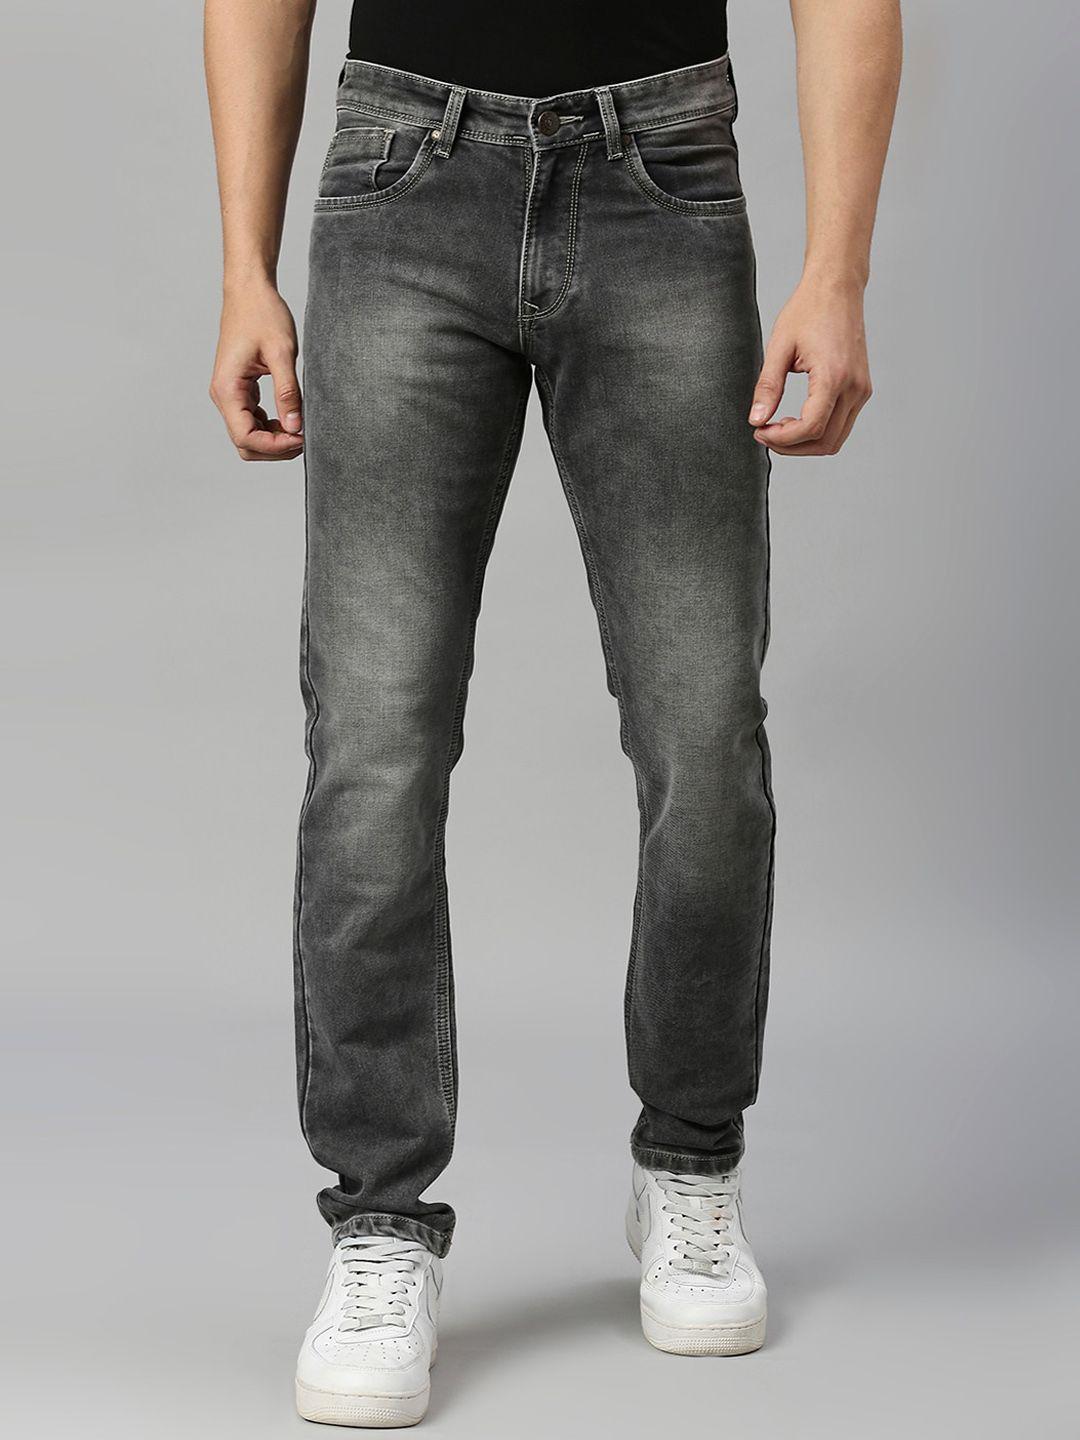 hj-hasasi-men-relaxed-fit-heavy-fade-stretchable-jeans